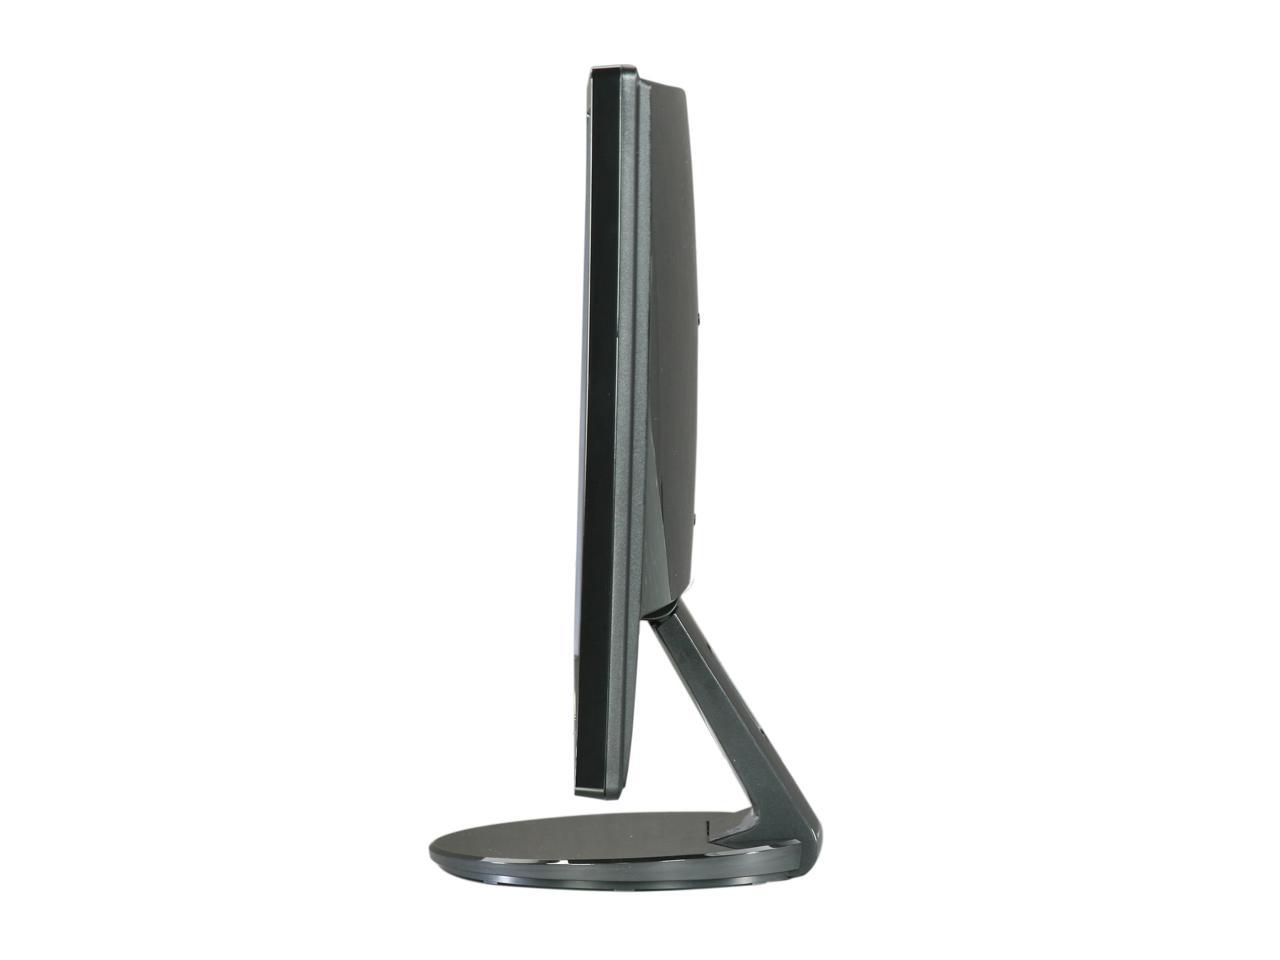 asus ve247h stand mounts